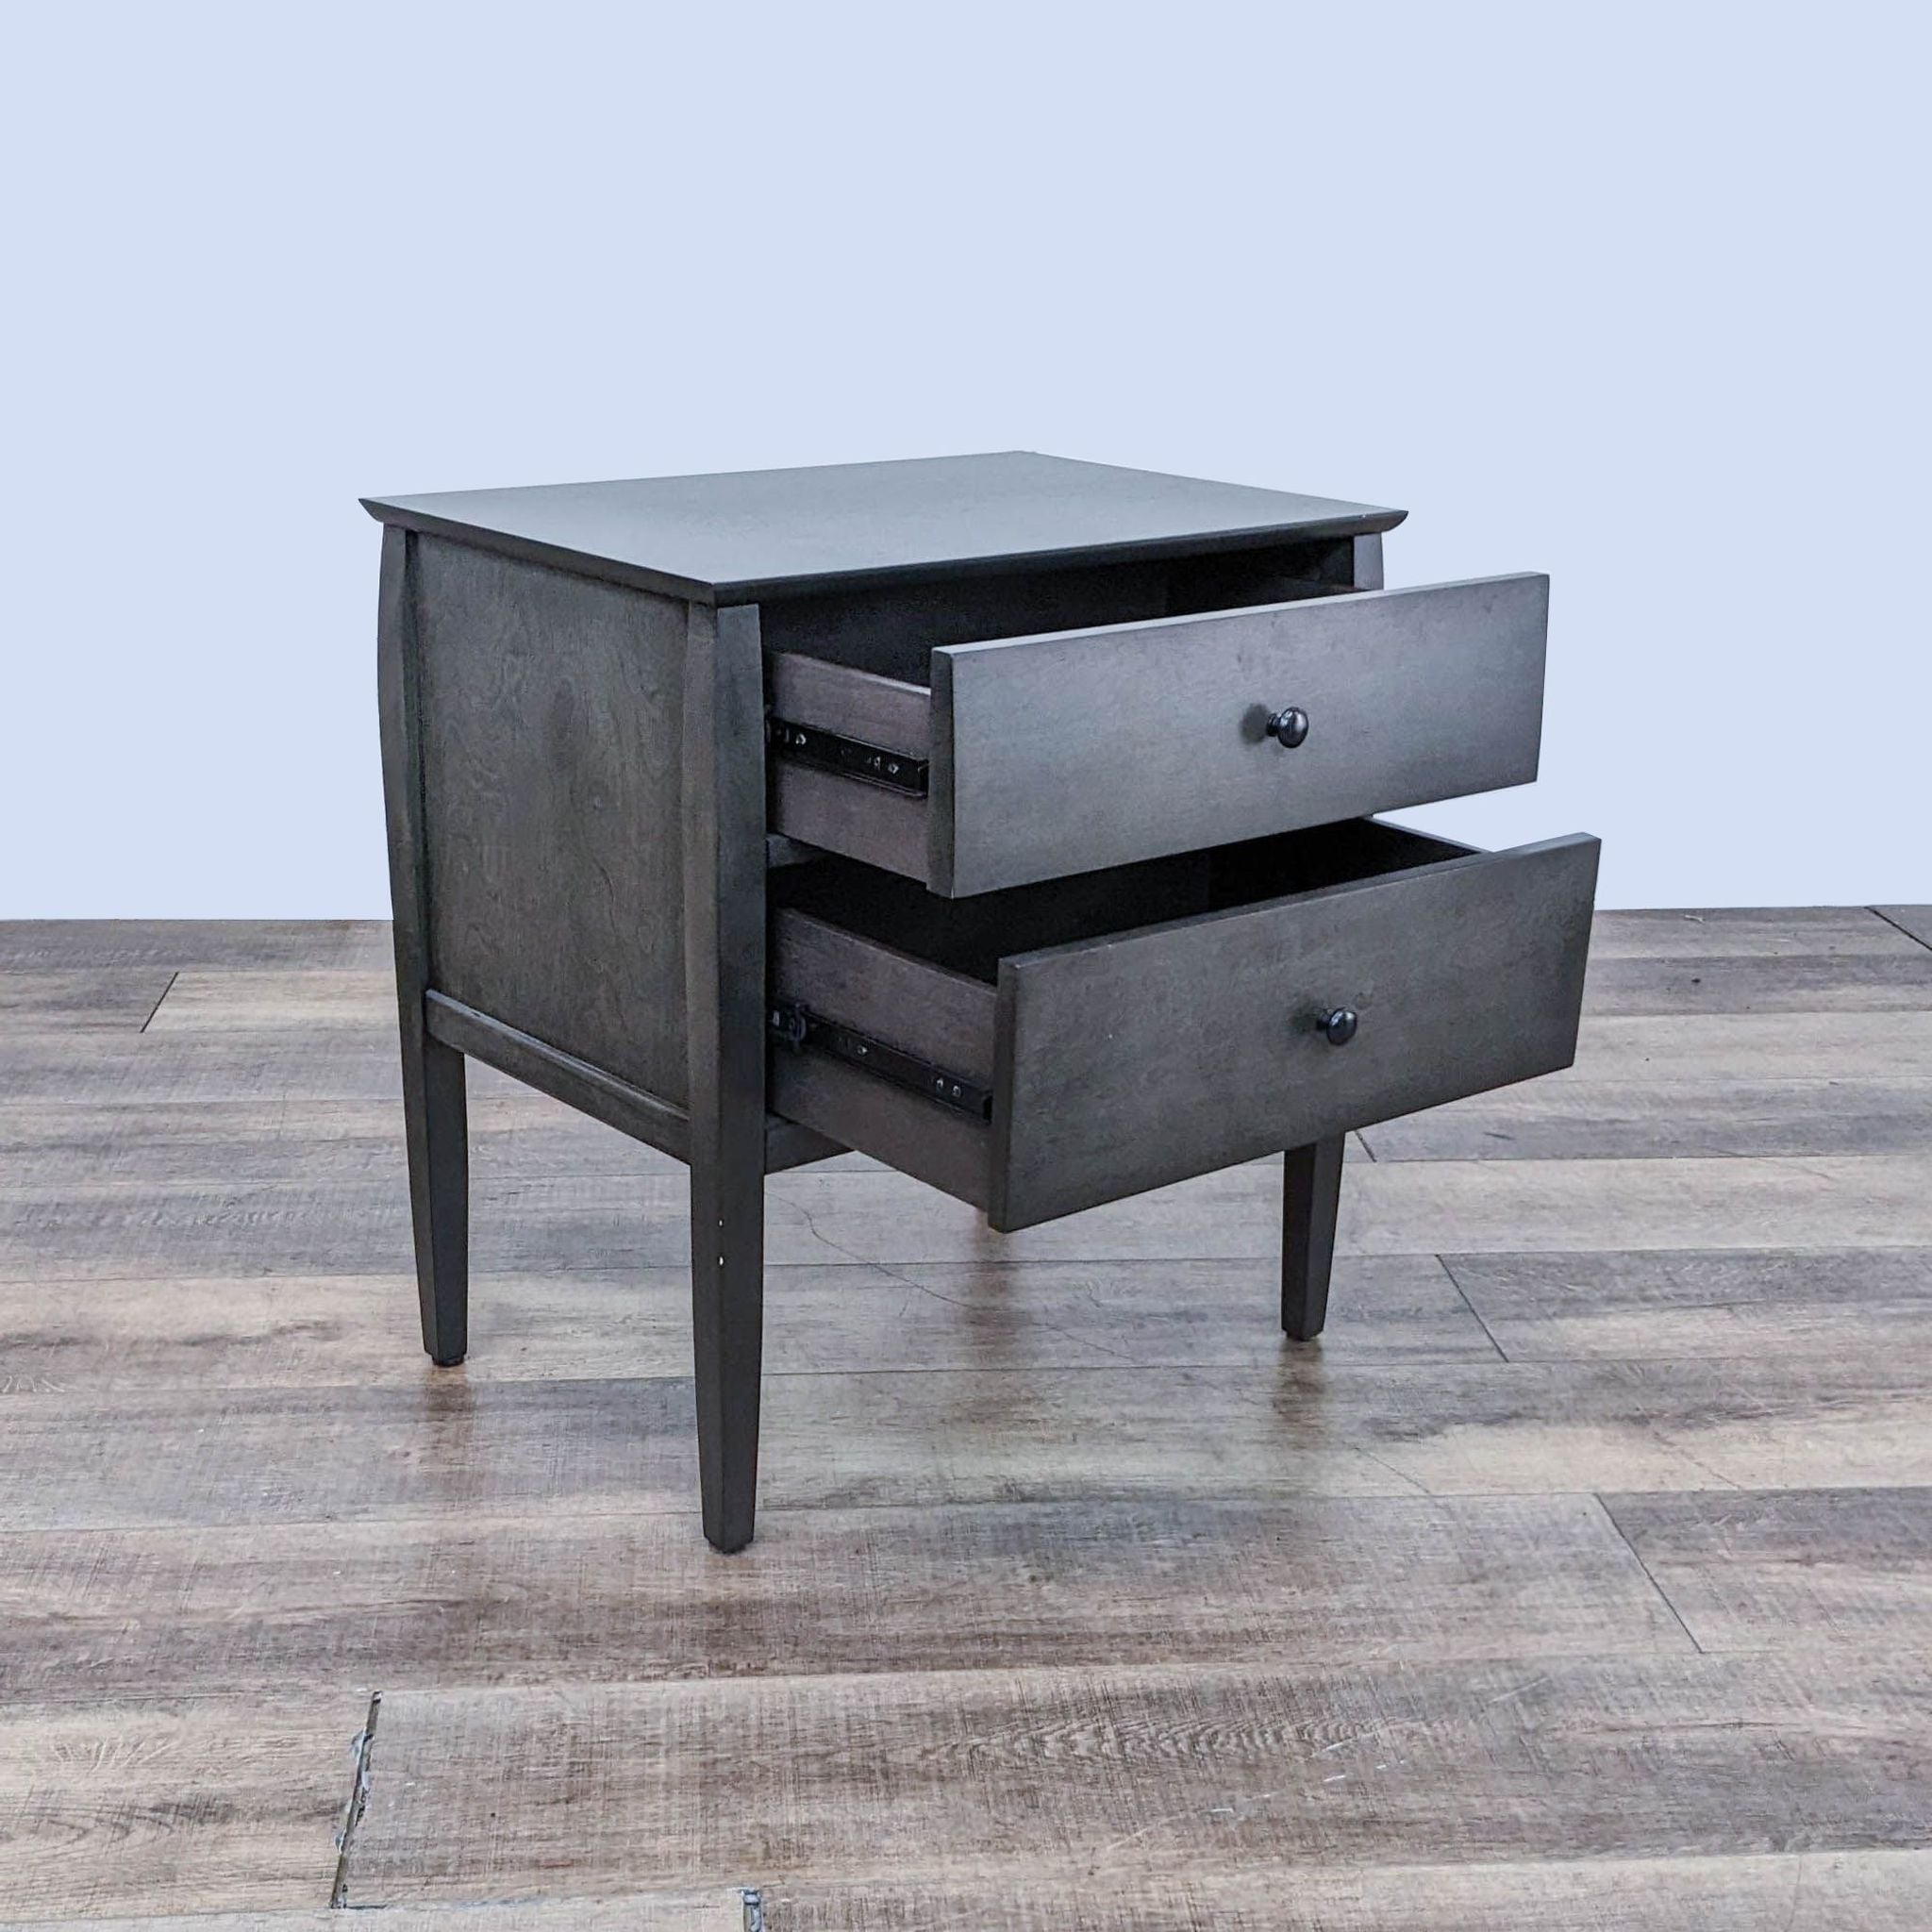 Alt text 2: Open drawer view of a birch veneer end table with round graphite-finished pulls, showcasing storage space, by Crate & Barrel.